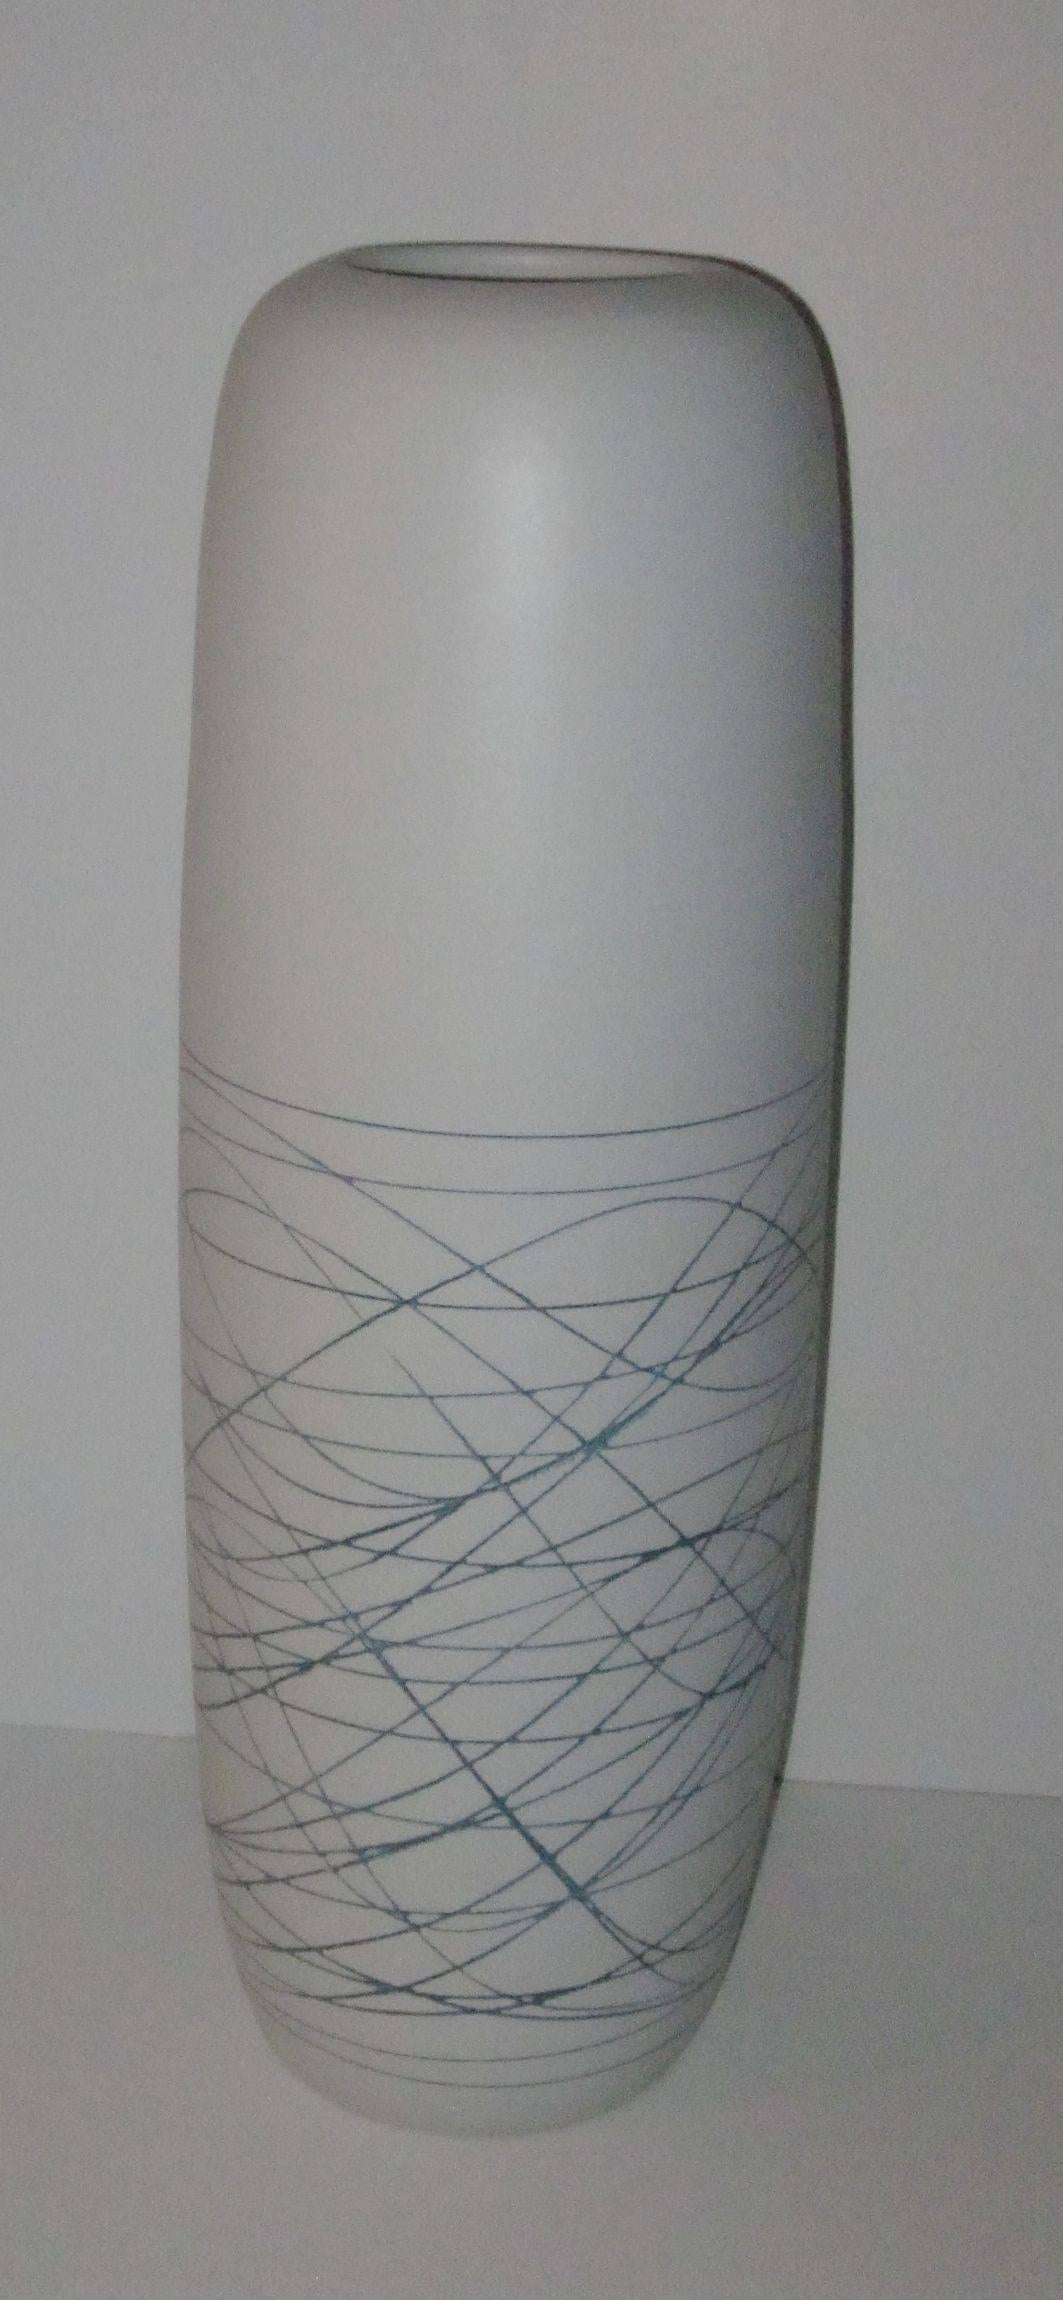 Contemporary Chinese white porcelain vase with a thin blue line design.
This vase is 15.5